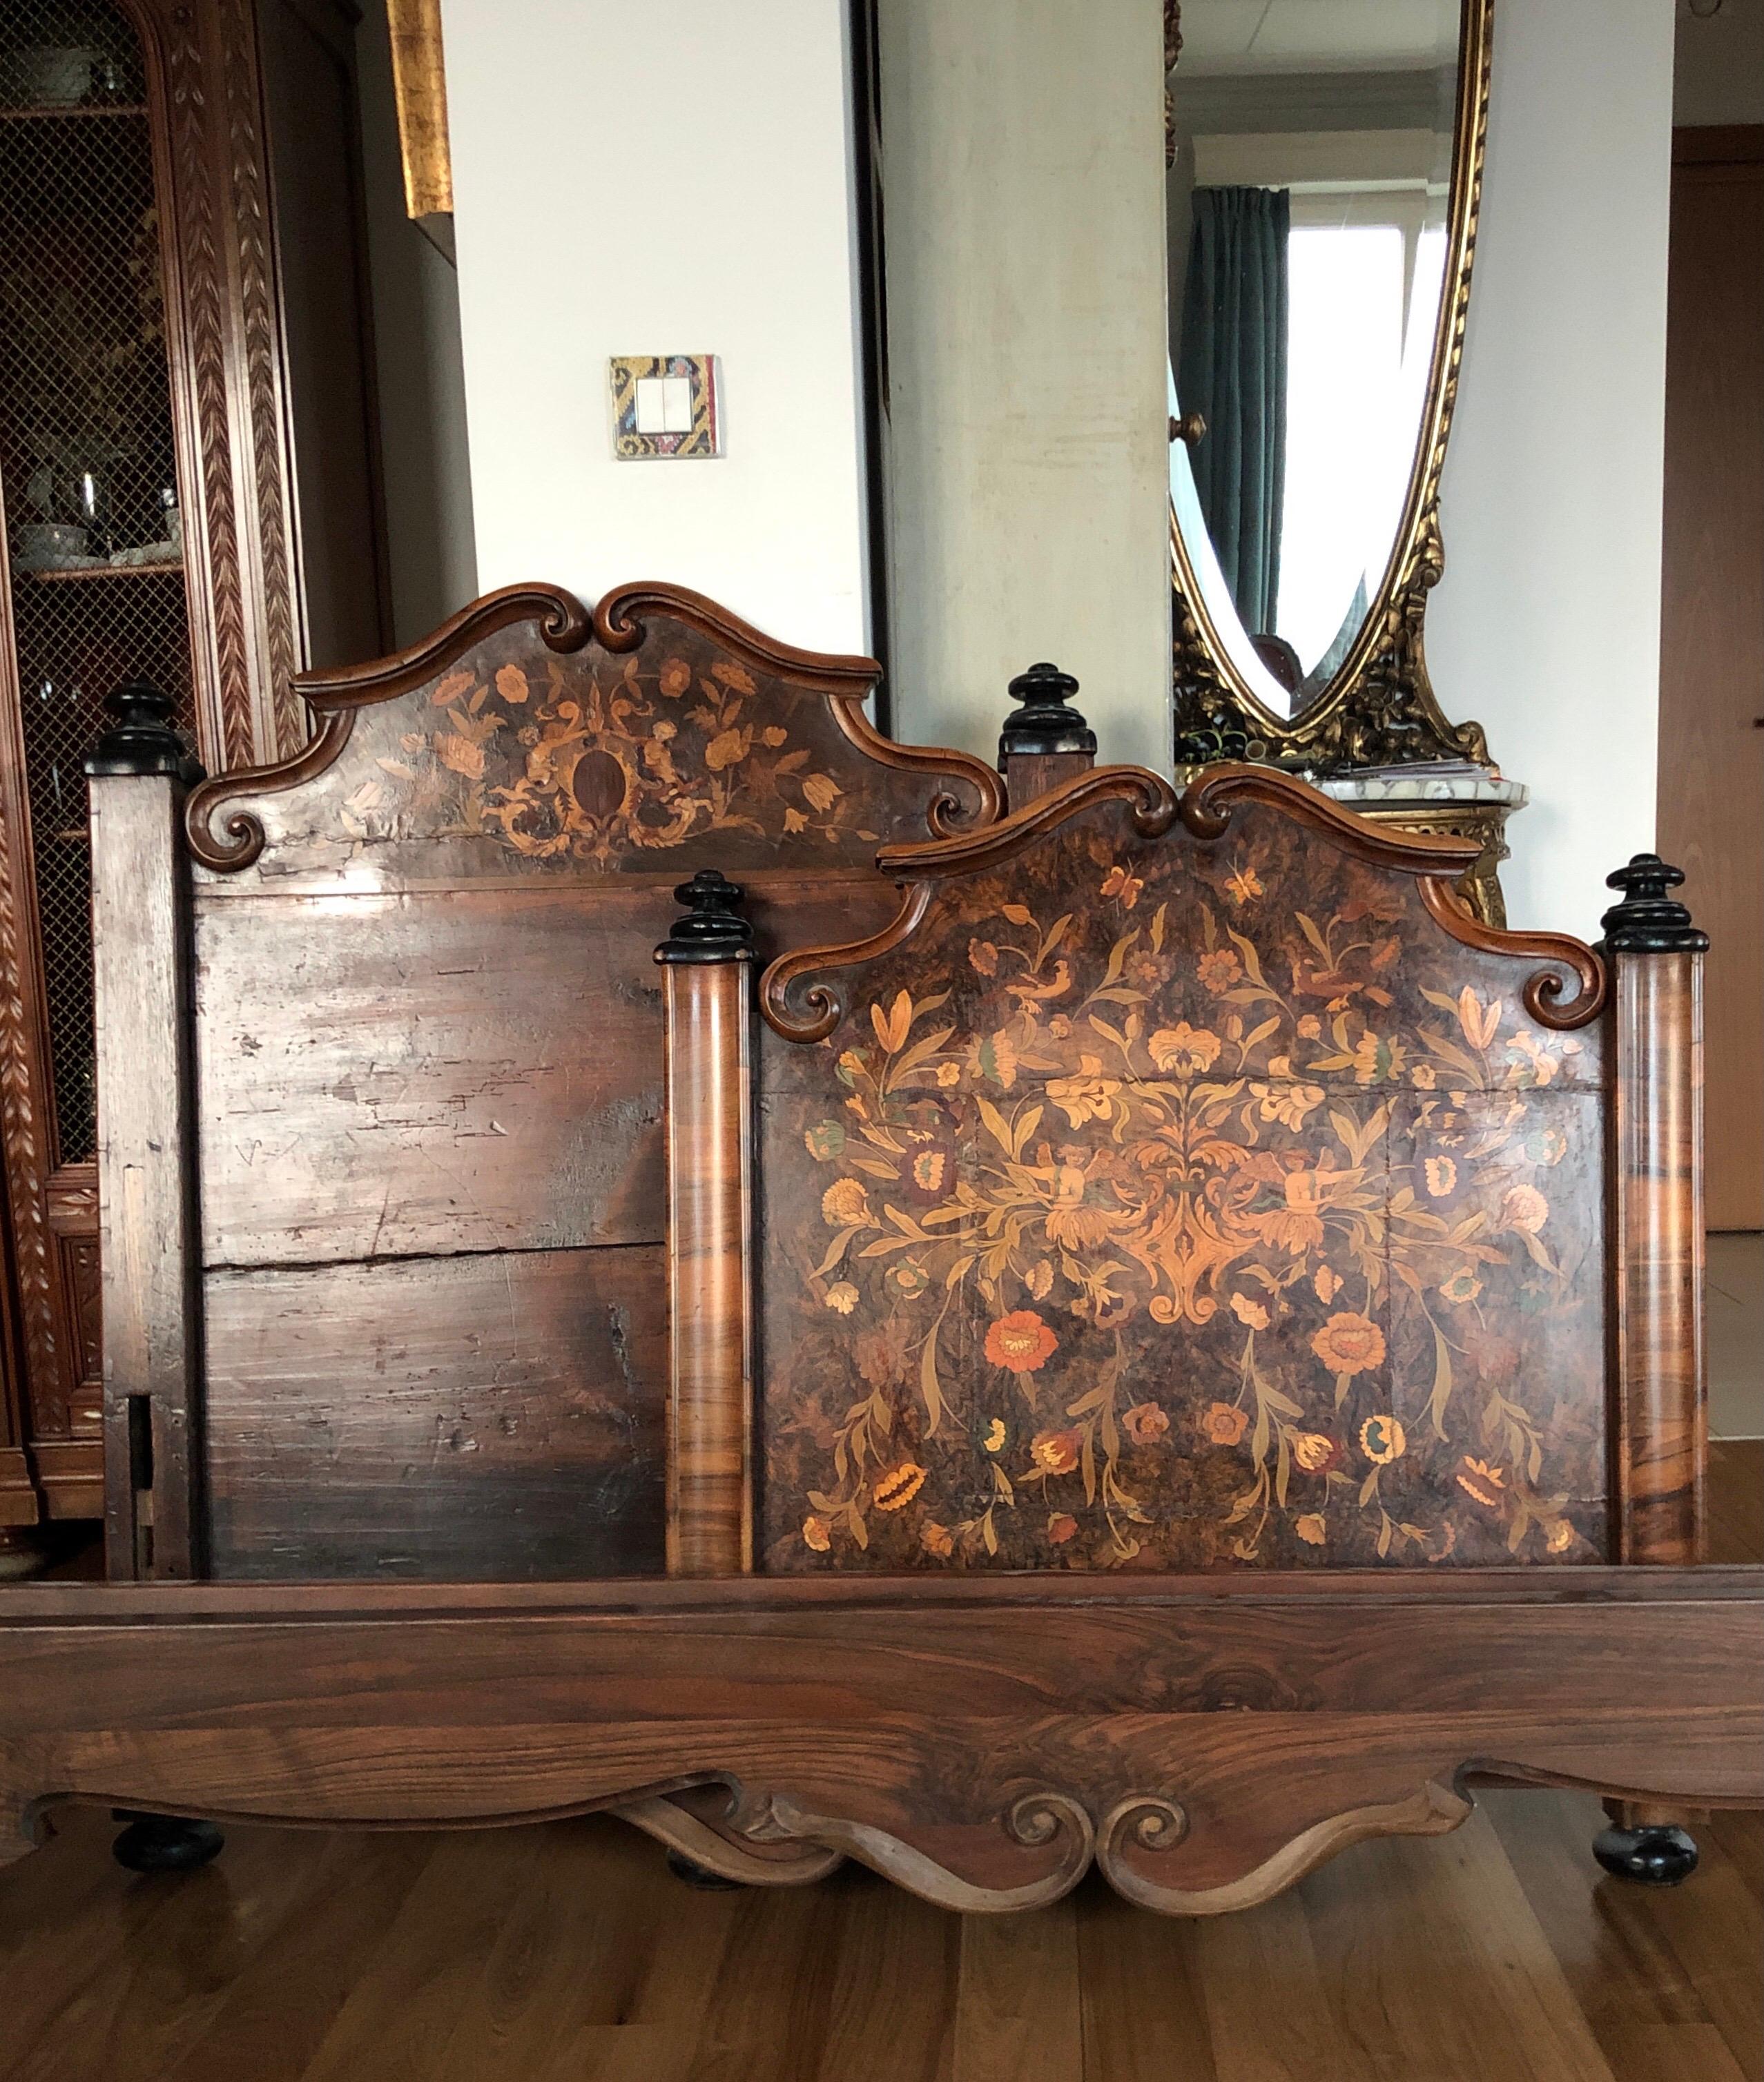 Antique Dutch marquetry mahogany single bed with colorful inlay.
The side parts were made of walnut and have the same hand carvings as the headboard and the footboard. Very extraordinary piece in good condition.
Netherland, circa 1780.